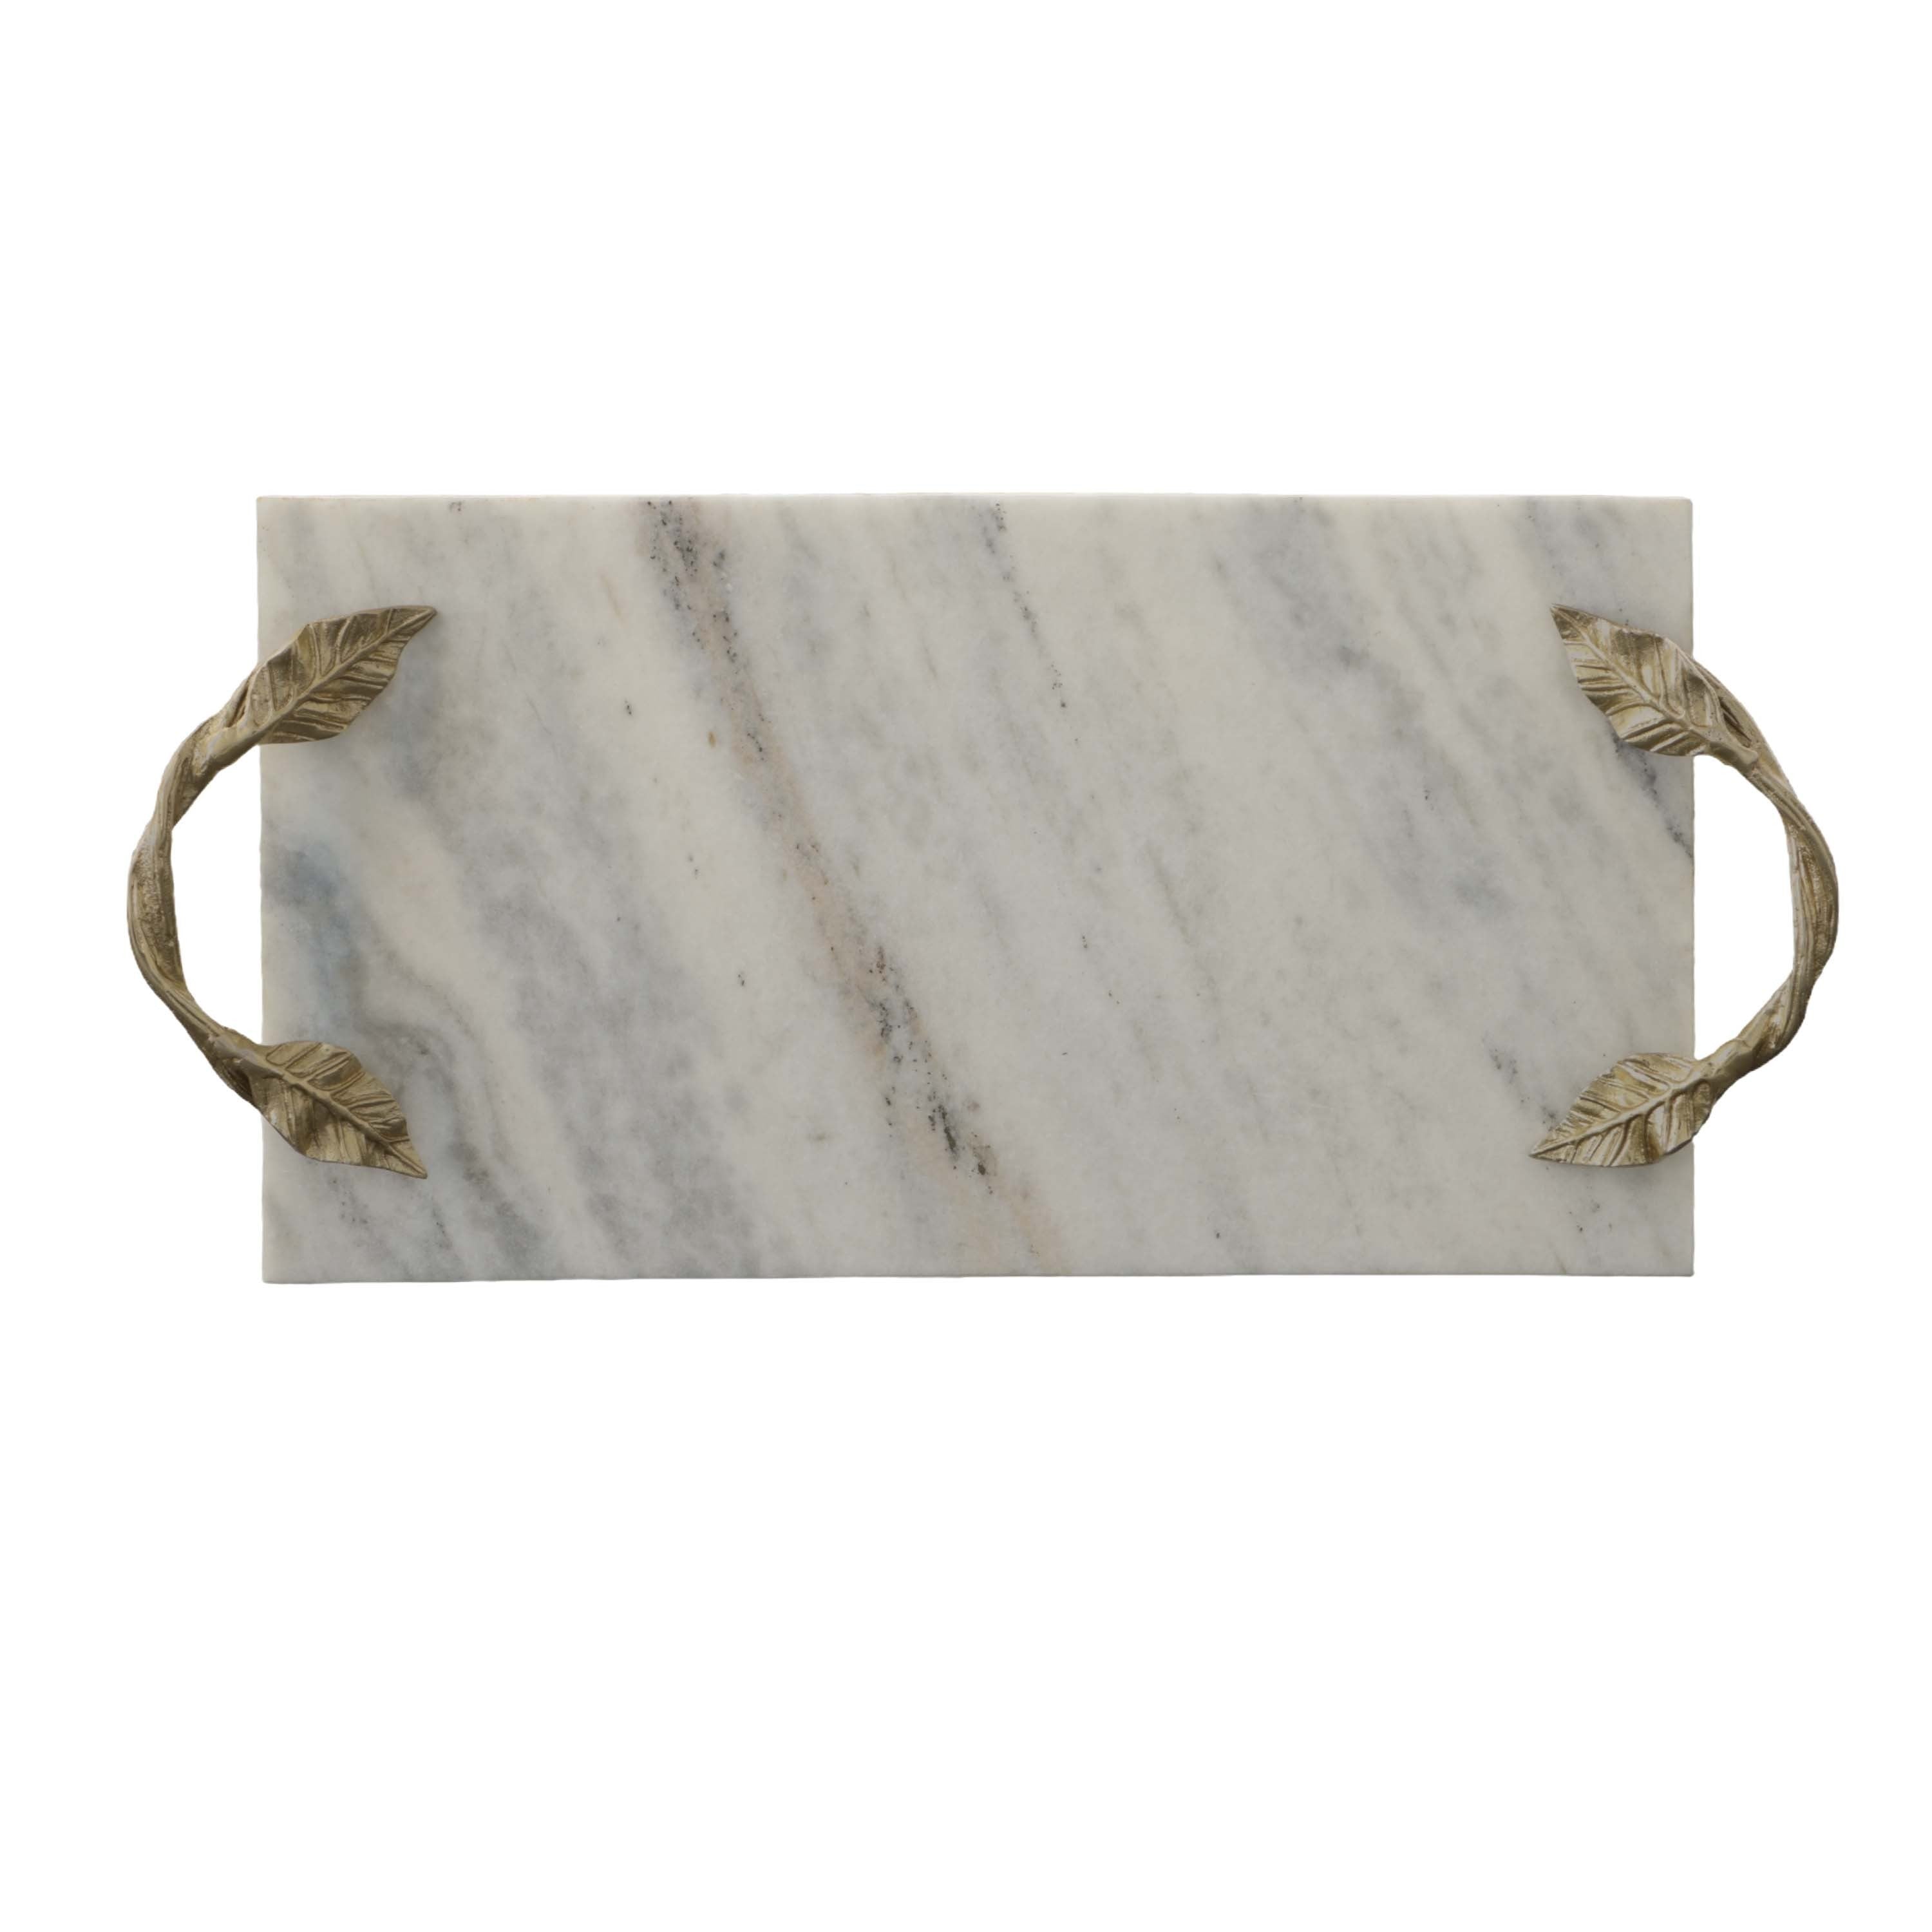 Decor Tray with Marble Frame and Carved Metal Handles